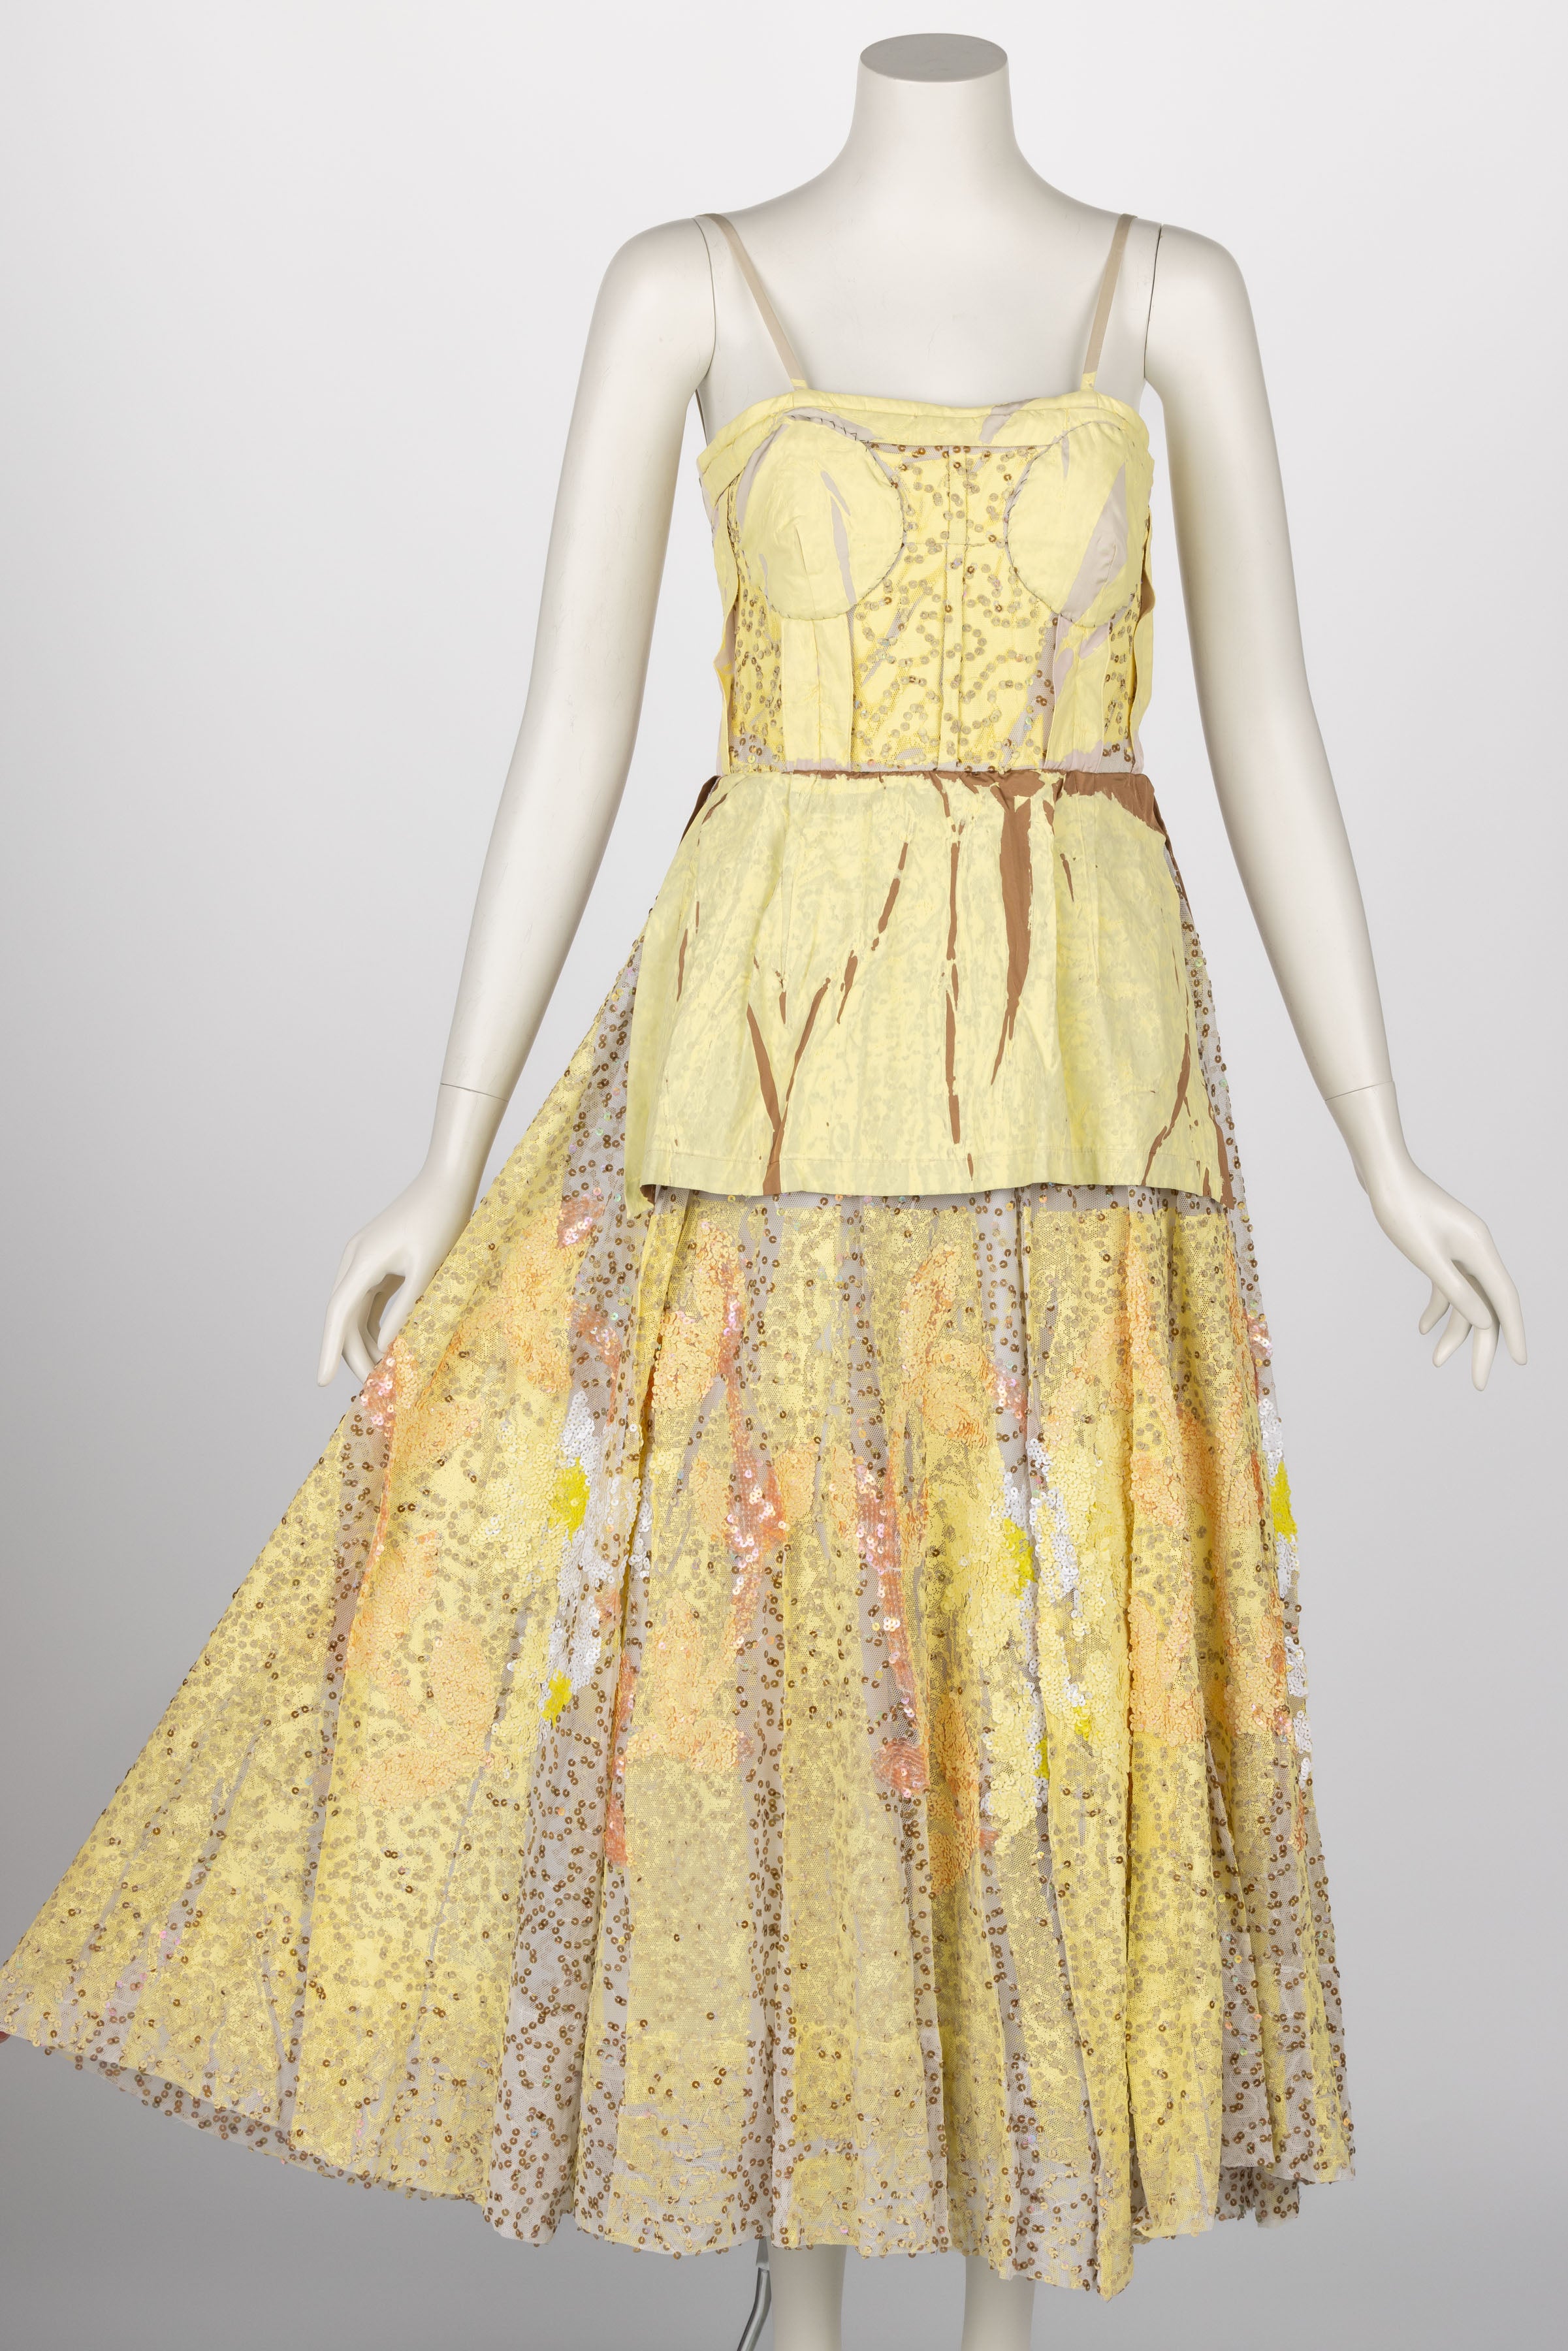 Marni Spring 2019 Runway Yellow Sequins Sleeveless Dress In Excellent Condition For Sale In Boca Raton, FL